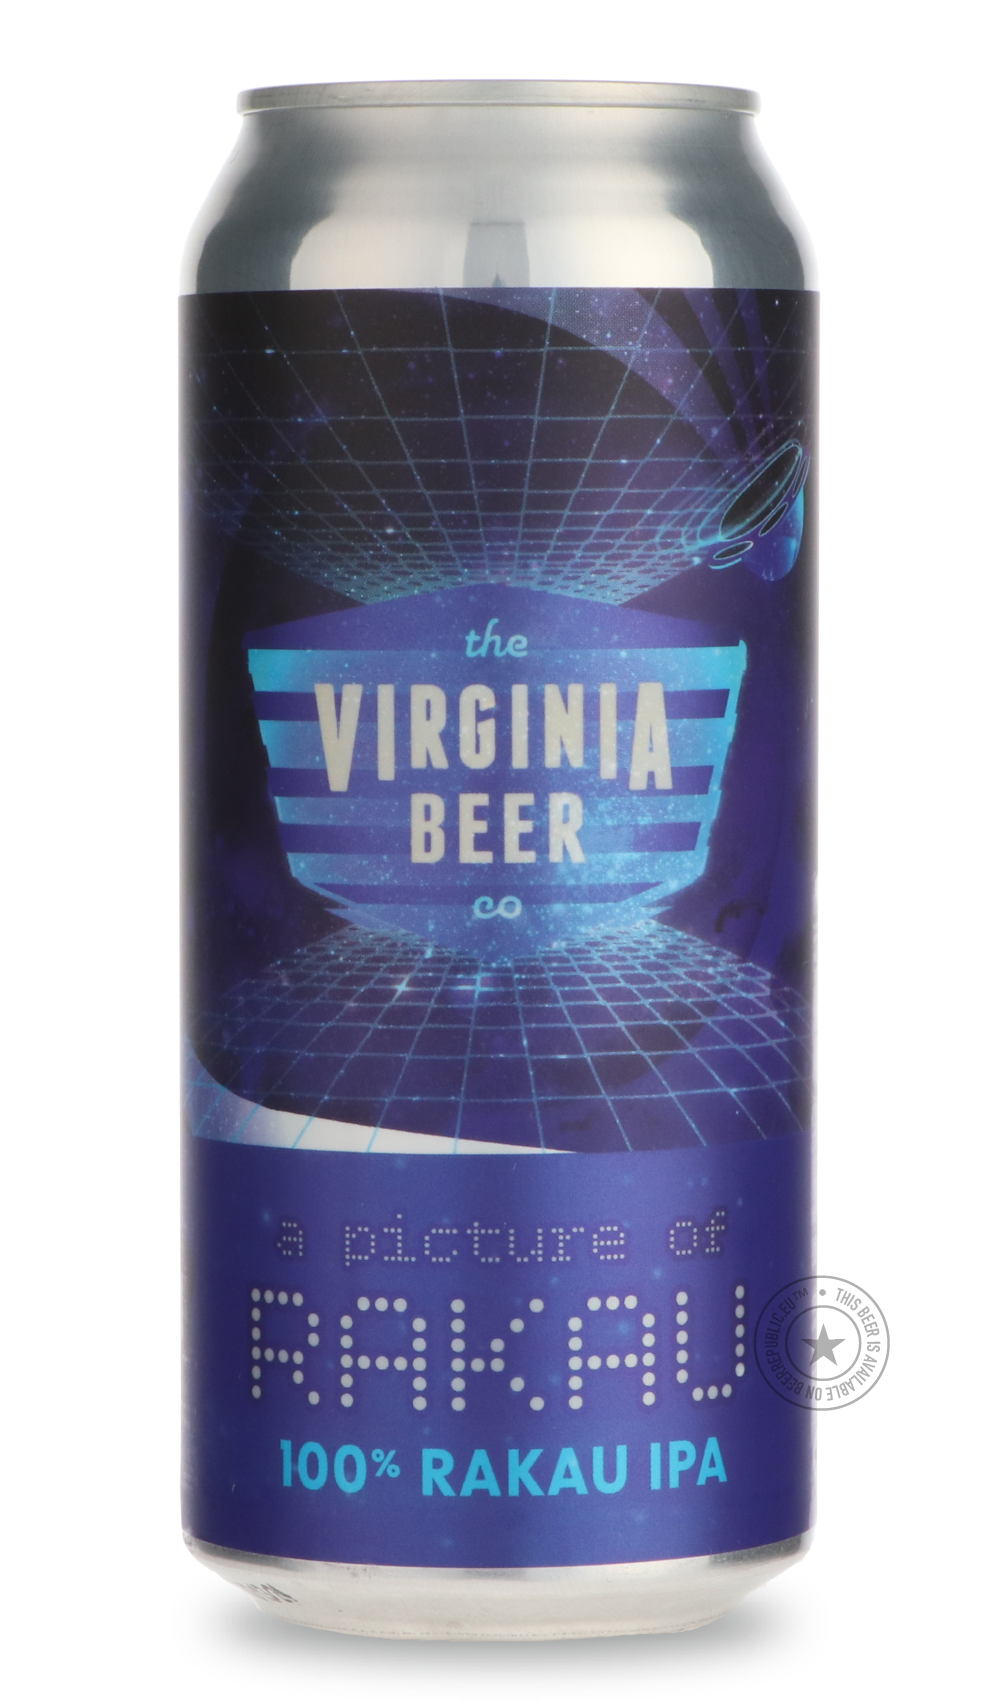 -The Virginia Beer Company- A Picture of Rakau-Pale- Only @ Beer Republic - The best online beer store for American & Canadian craft beer - Buy beer online from the USA and Canada - Bier online kopen - Amerikaans bier kopen - Craft beer store - Craft beer kopen - Amerikanisch bier kaufen - Bier online kaufen - Acheter biere online - IPA - Stout - Porter - New England IPA - Hazy IPA - Imperial Stout - Barrel Aged - Barrel Aged Imperial Stout - Brown - Dark beer - Blond - Blonde - Pilsner - Lager - Wheat - We